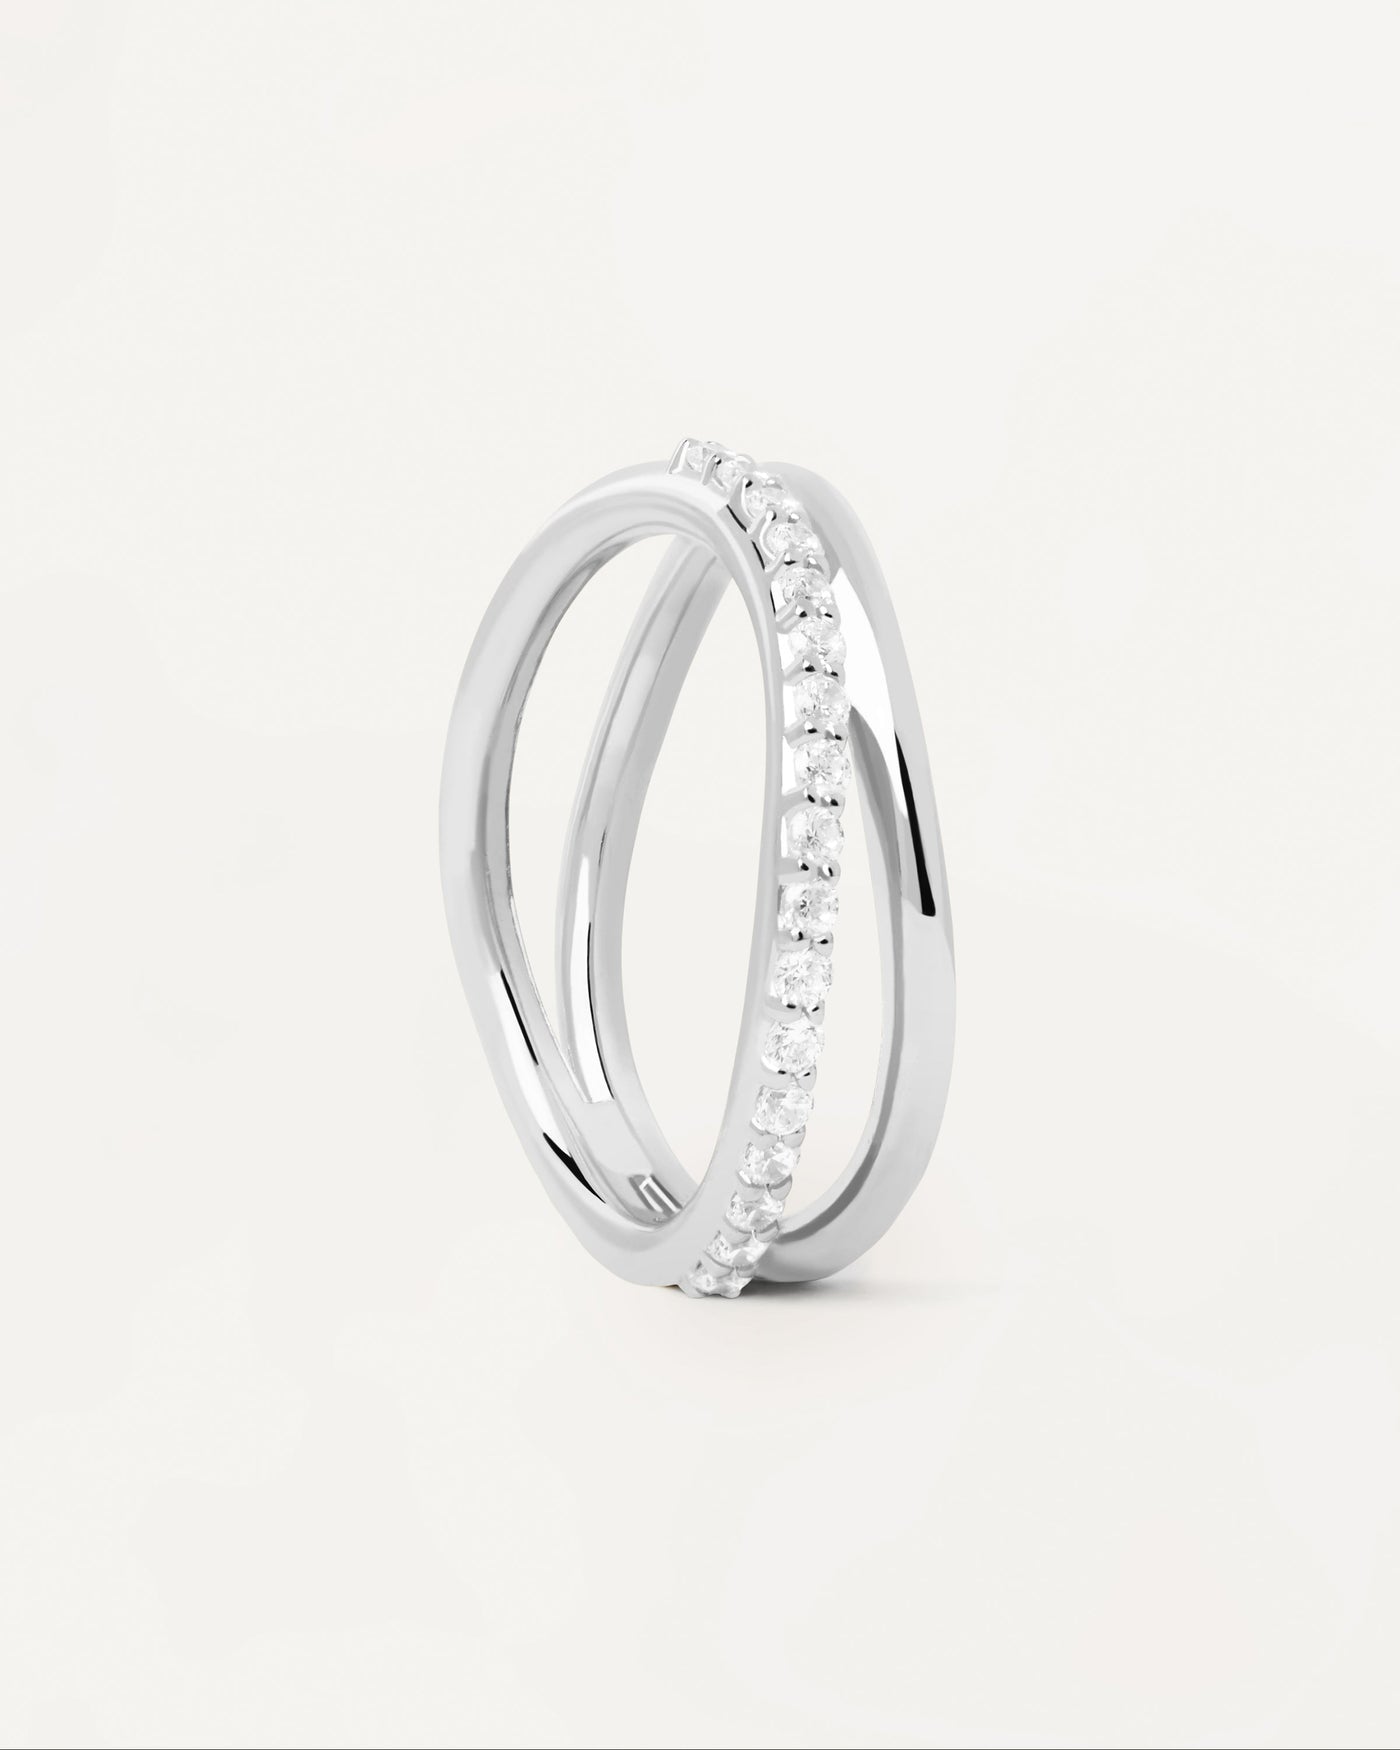 2023 Selection | Twister Silver Ring. 925 silver ring with two wavy bands: plain and zirconia eternity band. Get the latest arrival from PDPAOLA. Place your order safely and get this Best Seller. Free Shipping.